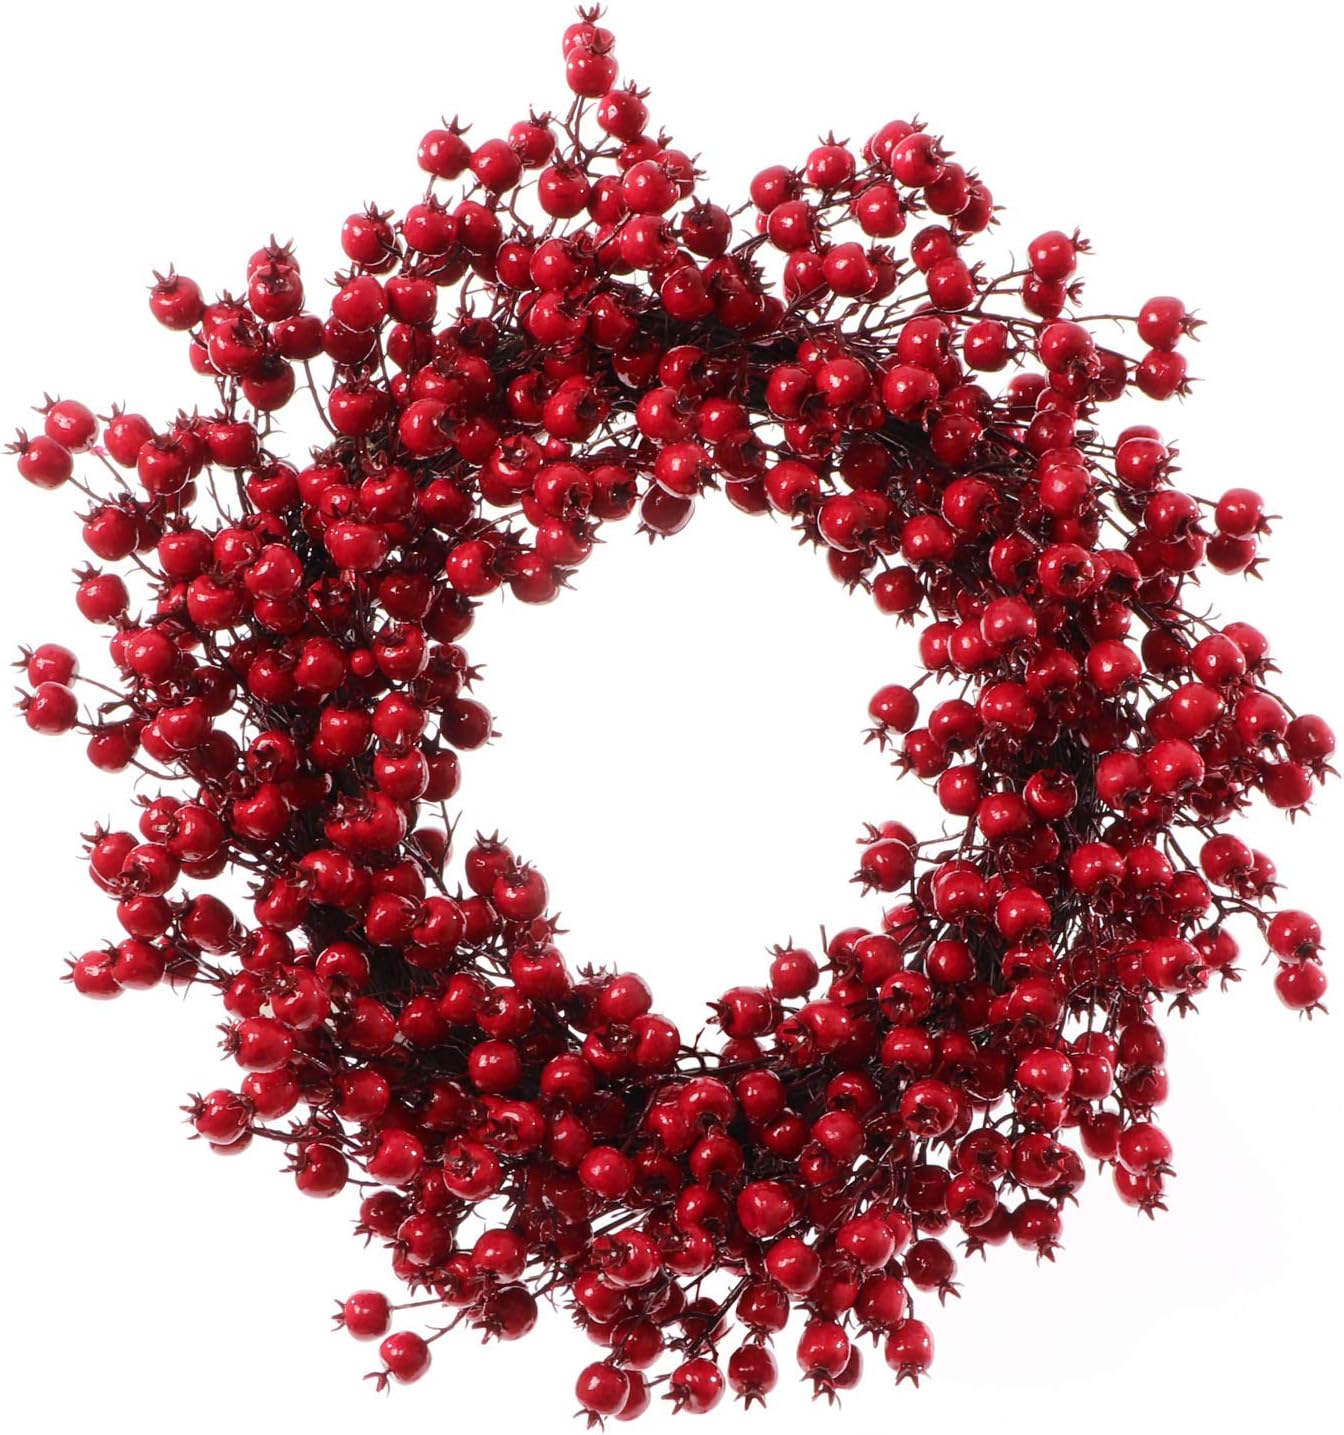 Red Hawthorn Berry Wreath | 22" Wide | Indoor/Outdoor Use | Holiday Xmas Accents | Christmas Wreaths | Home & Office Decor (Set of 2)